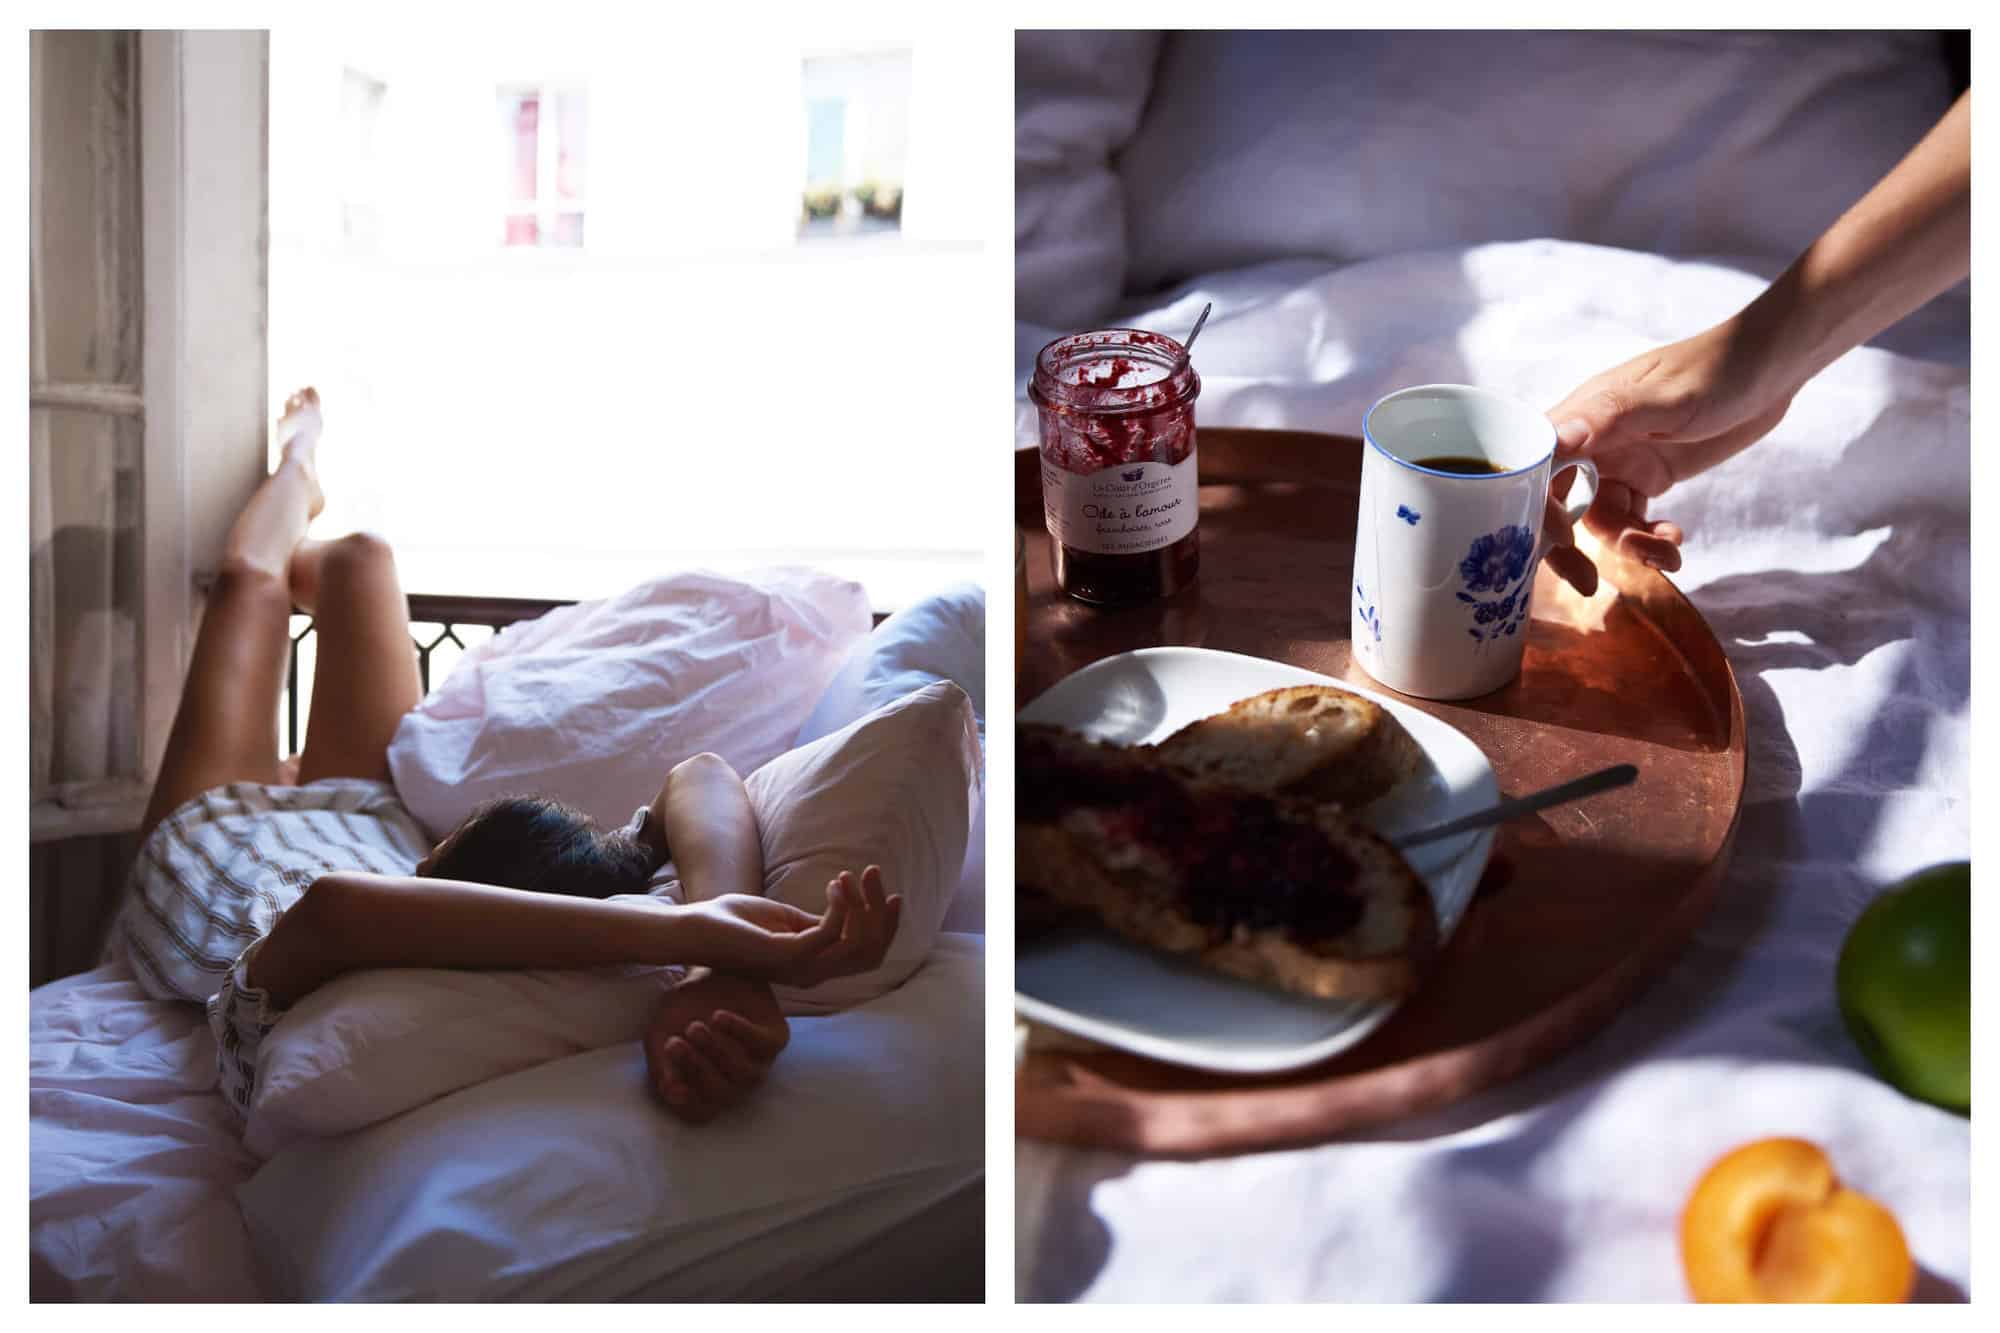 Left: a woman lying on French bed linen from La Chambre with her legs hanging out of a Paris apartment window. Right: a platter with toast, jam, and coffee on French bed linen by La Chambre.